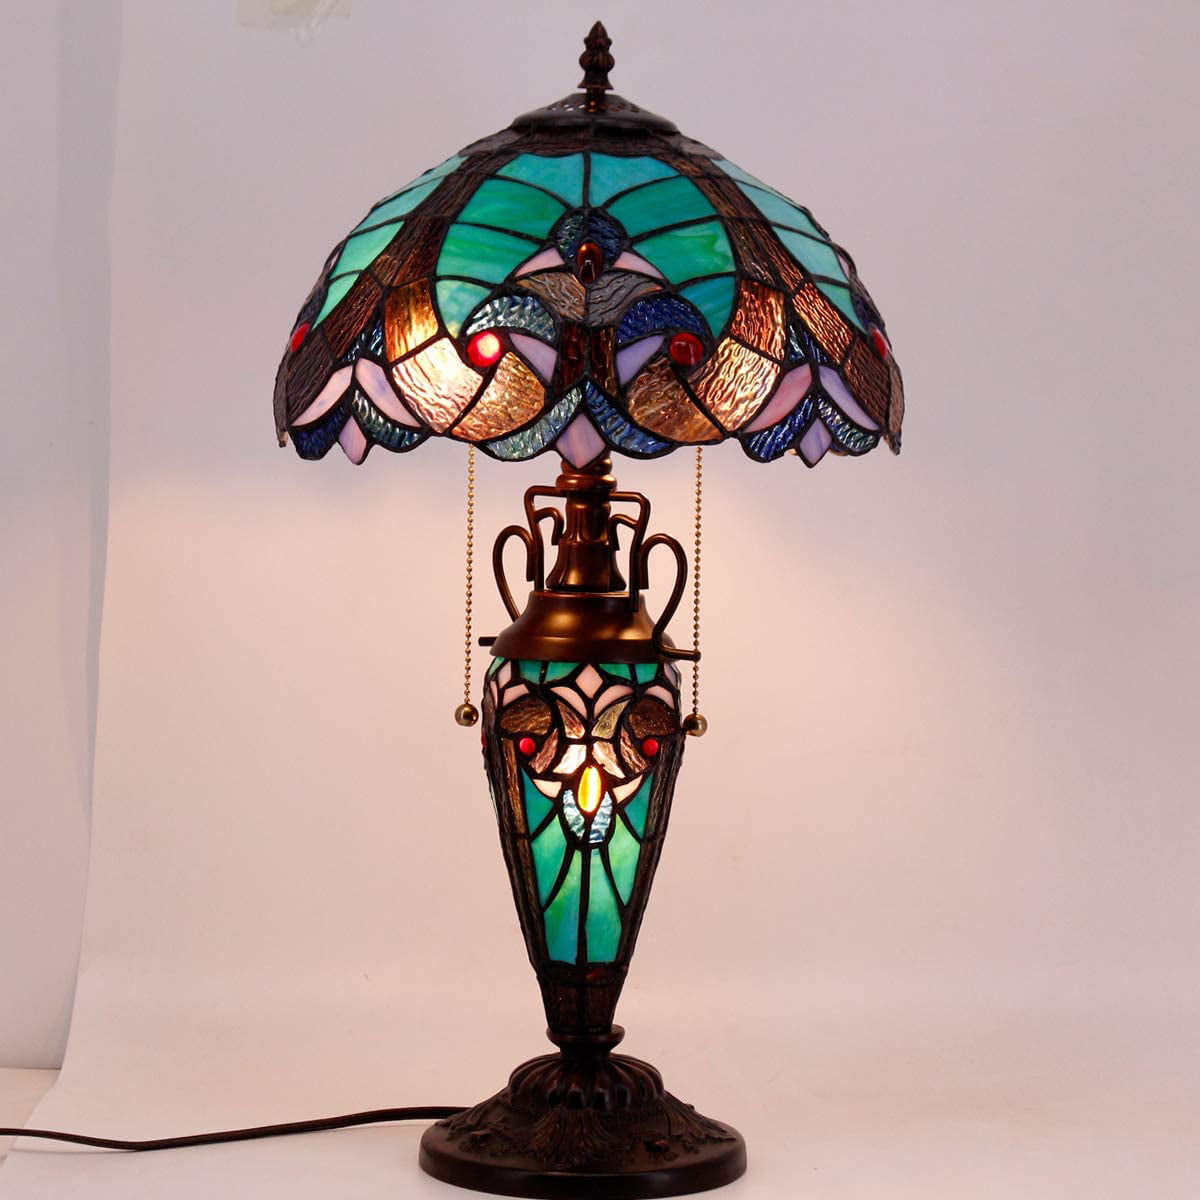 GEDUBIUBOO  Style Table Lamp Green Stained Glass Liaison Lamp 12X12X22 Inches Mother-Daughter Vase Desk Reading Light Decor Bedroom Living Room  Office S160G Series